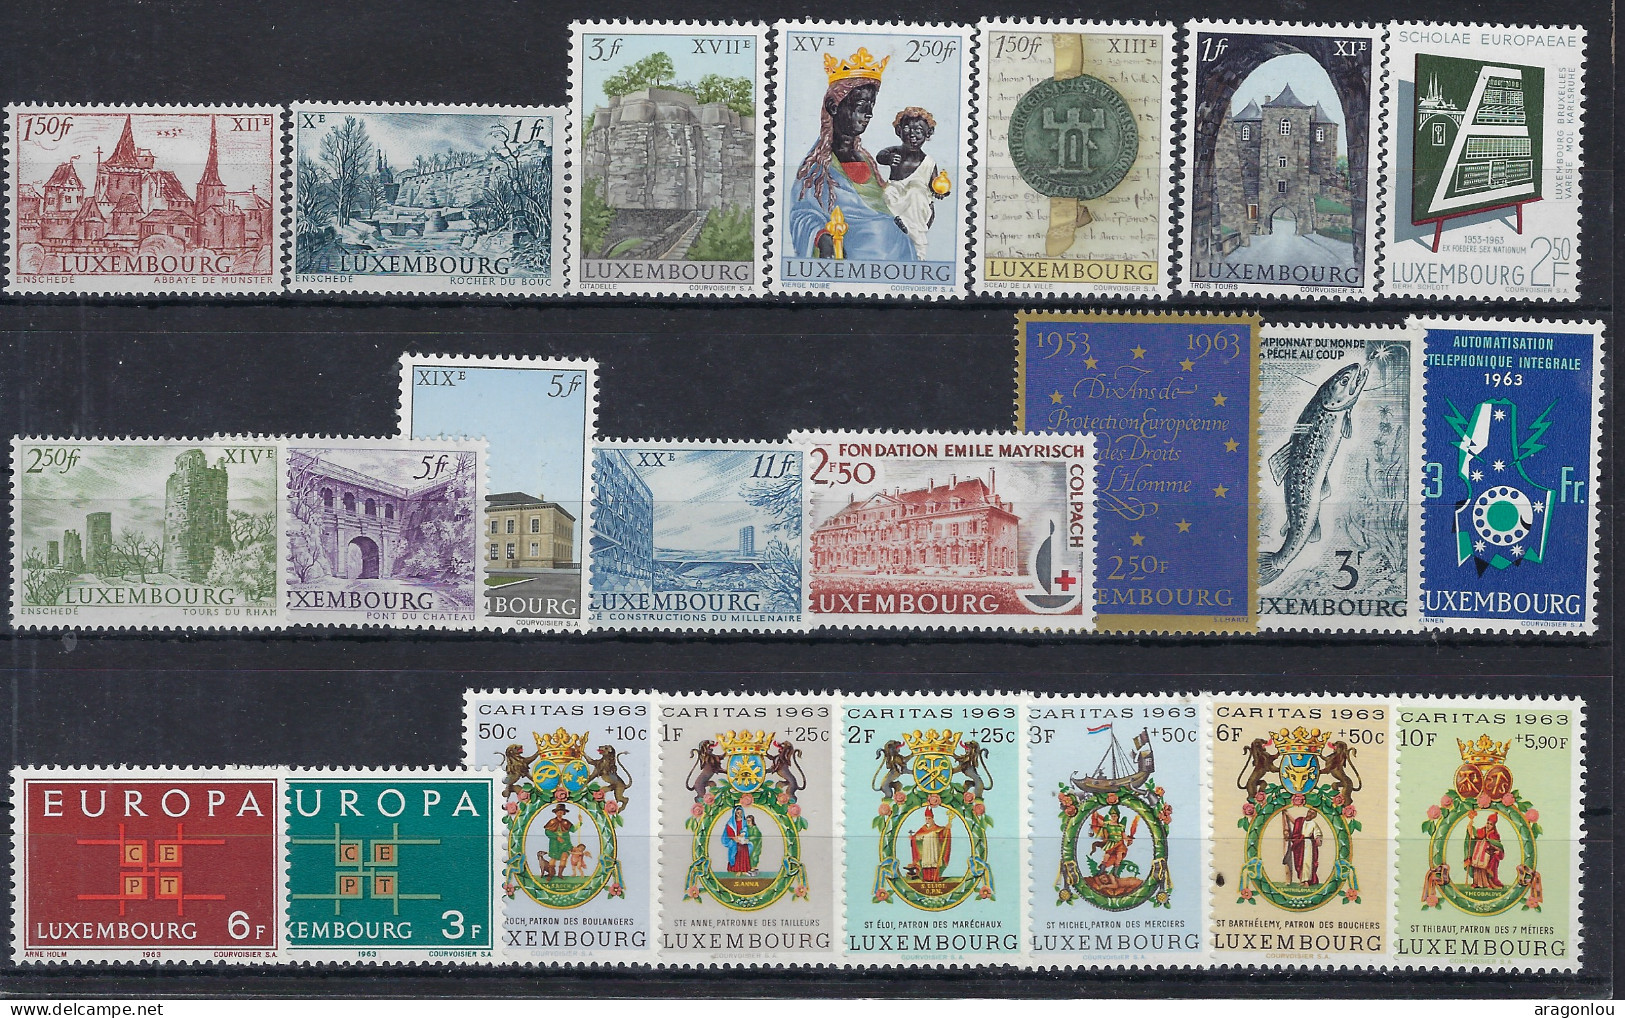 Luxembourg - Luxemburg - Timbres -  1963    Année Complète   8 Séries   MNH** - Full Years